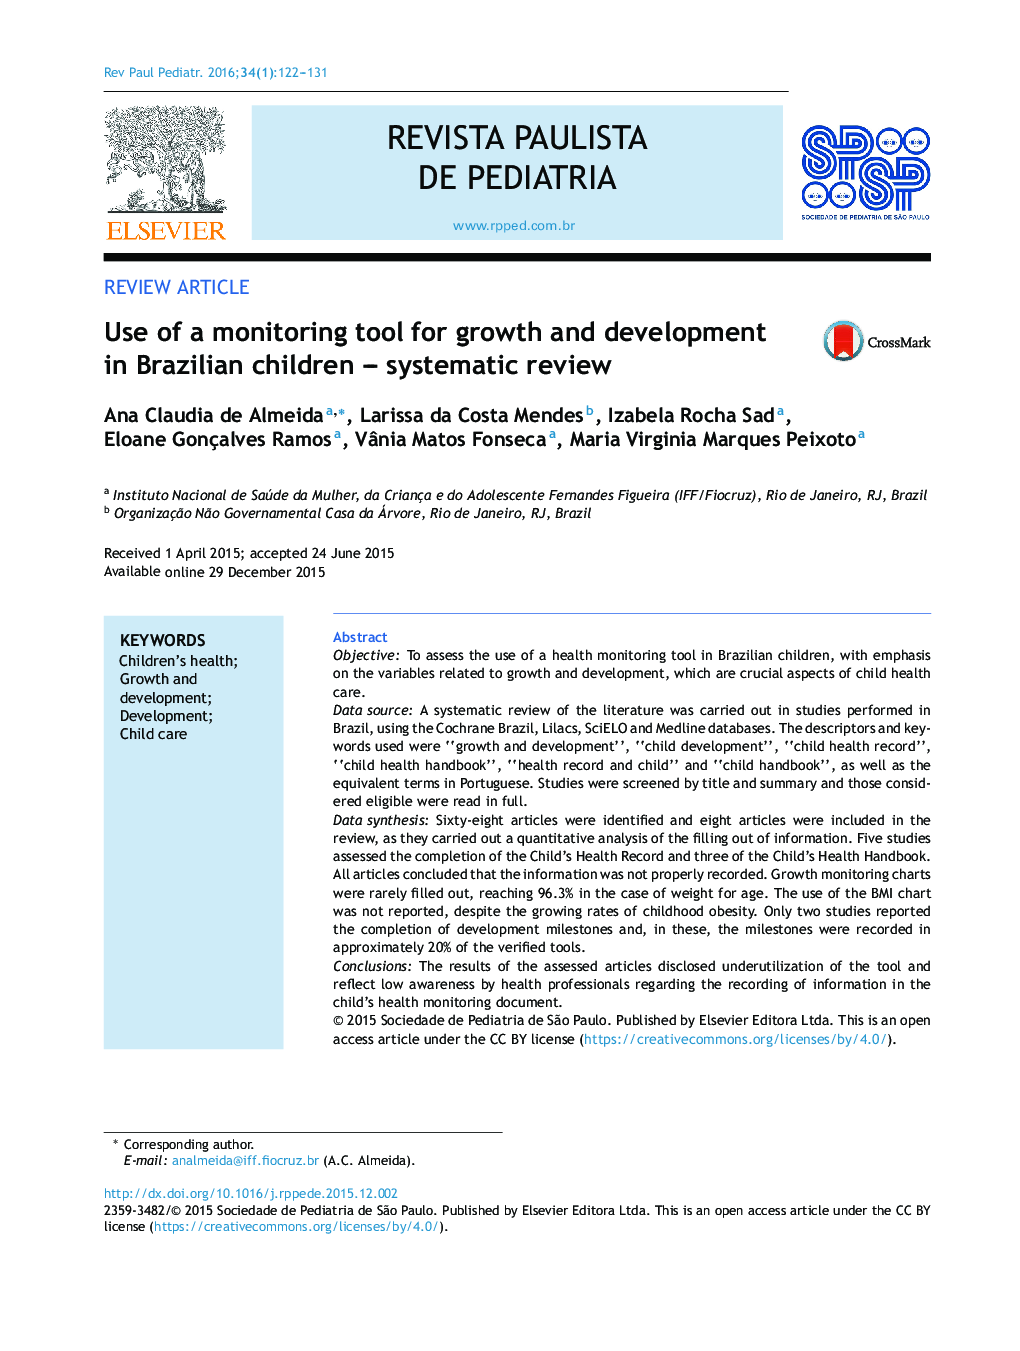 Use of a monitoring tool for growth and development in Brazilian children – systematic review